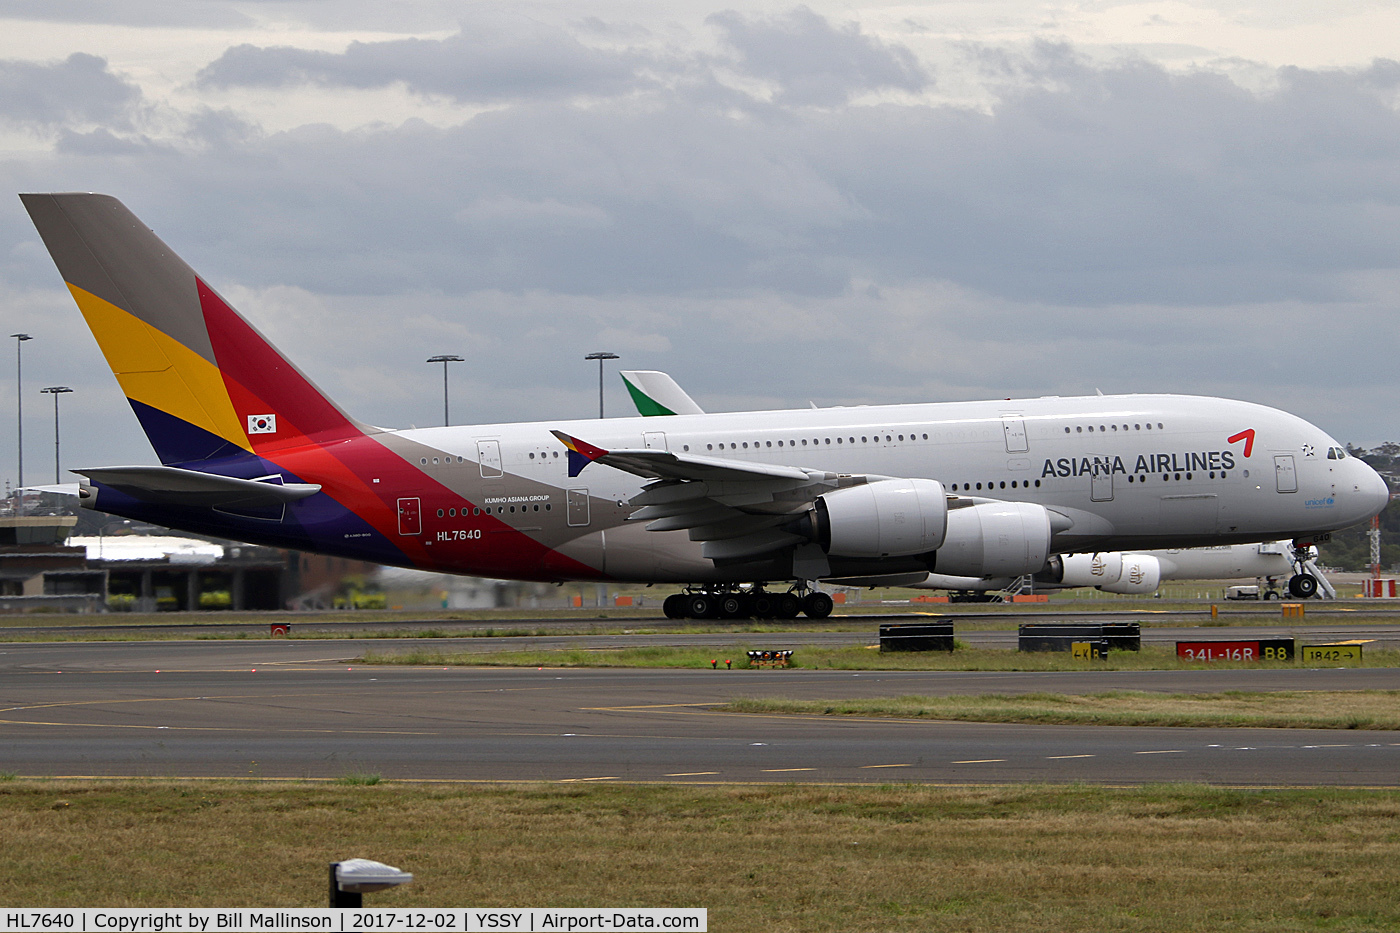 HL7640, 2016 Airbus A380-841 C/N 230, ROTATE FROM 34L